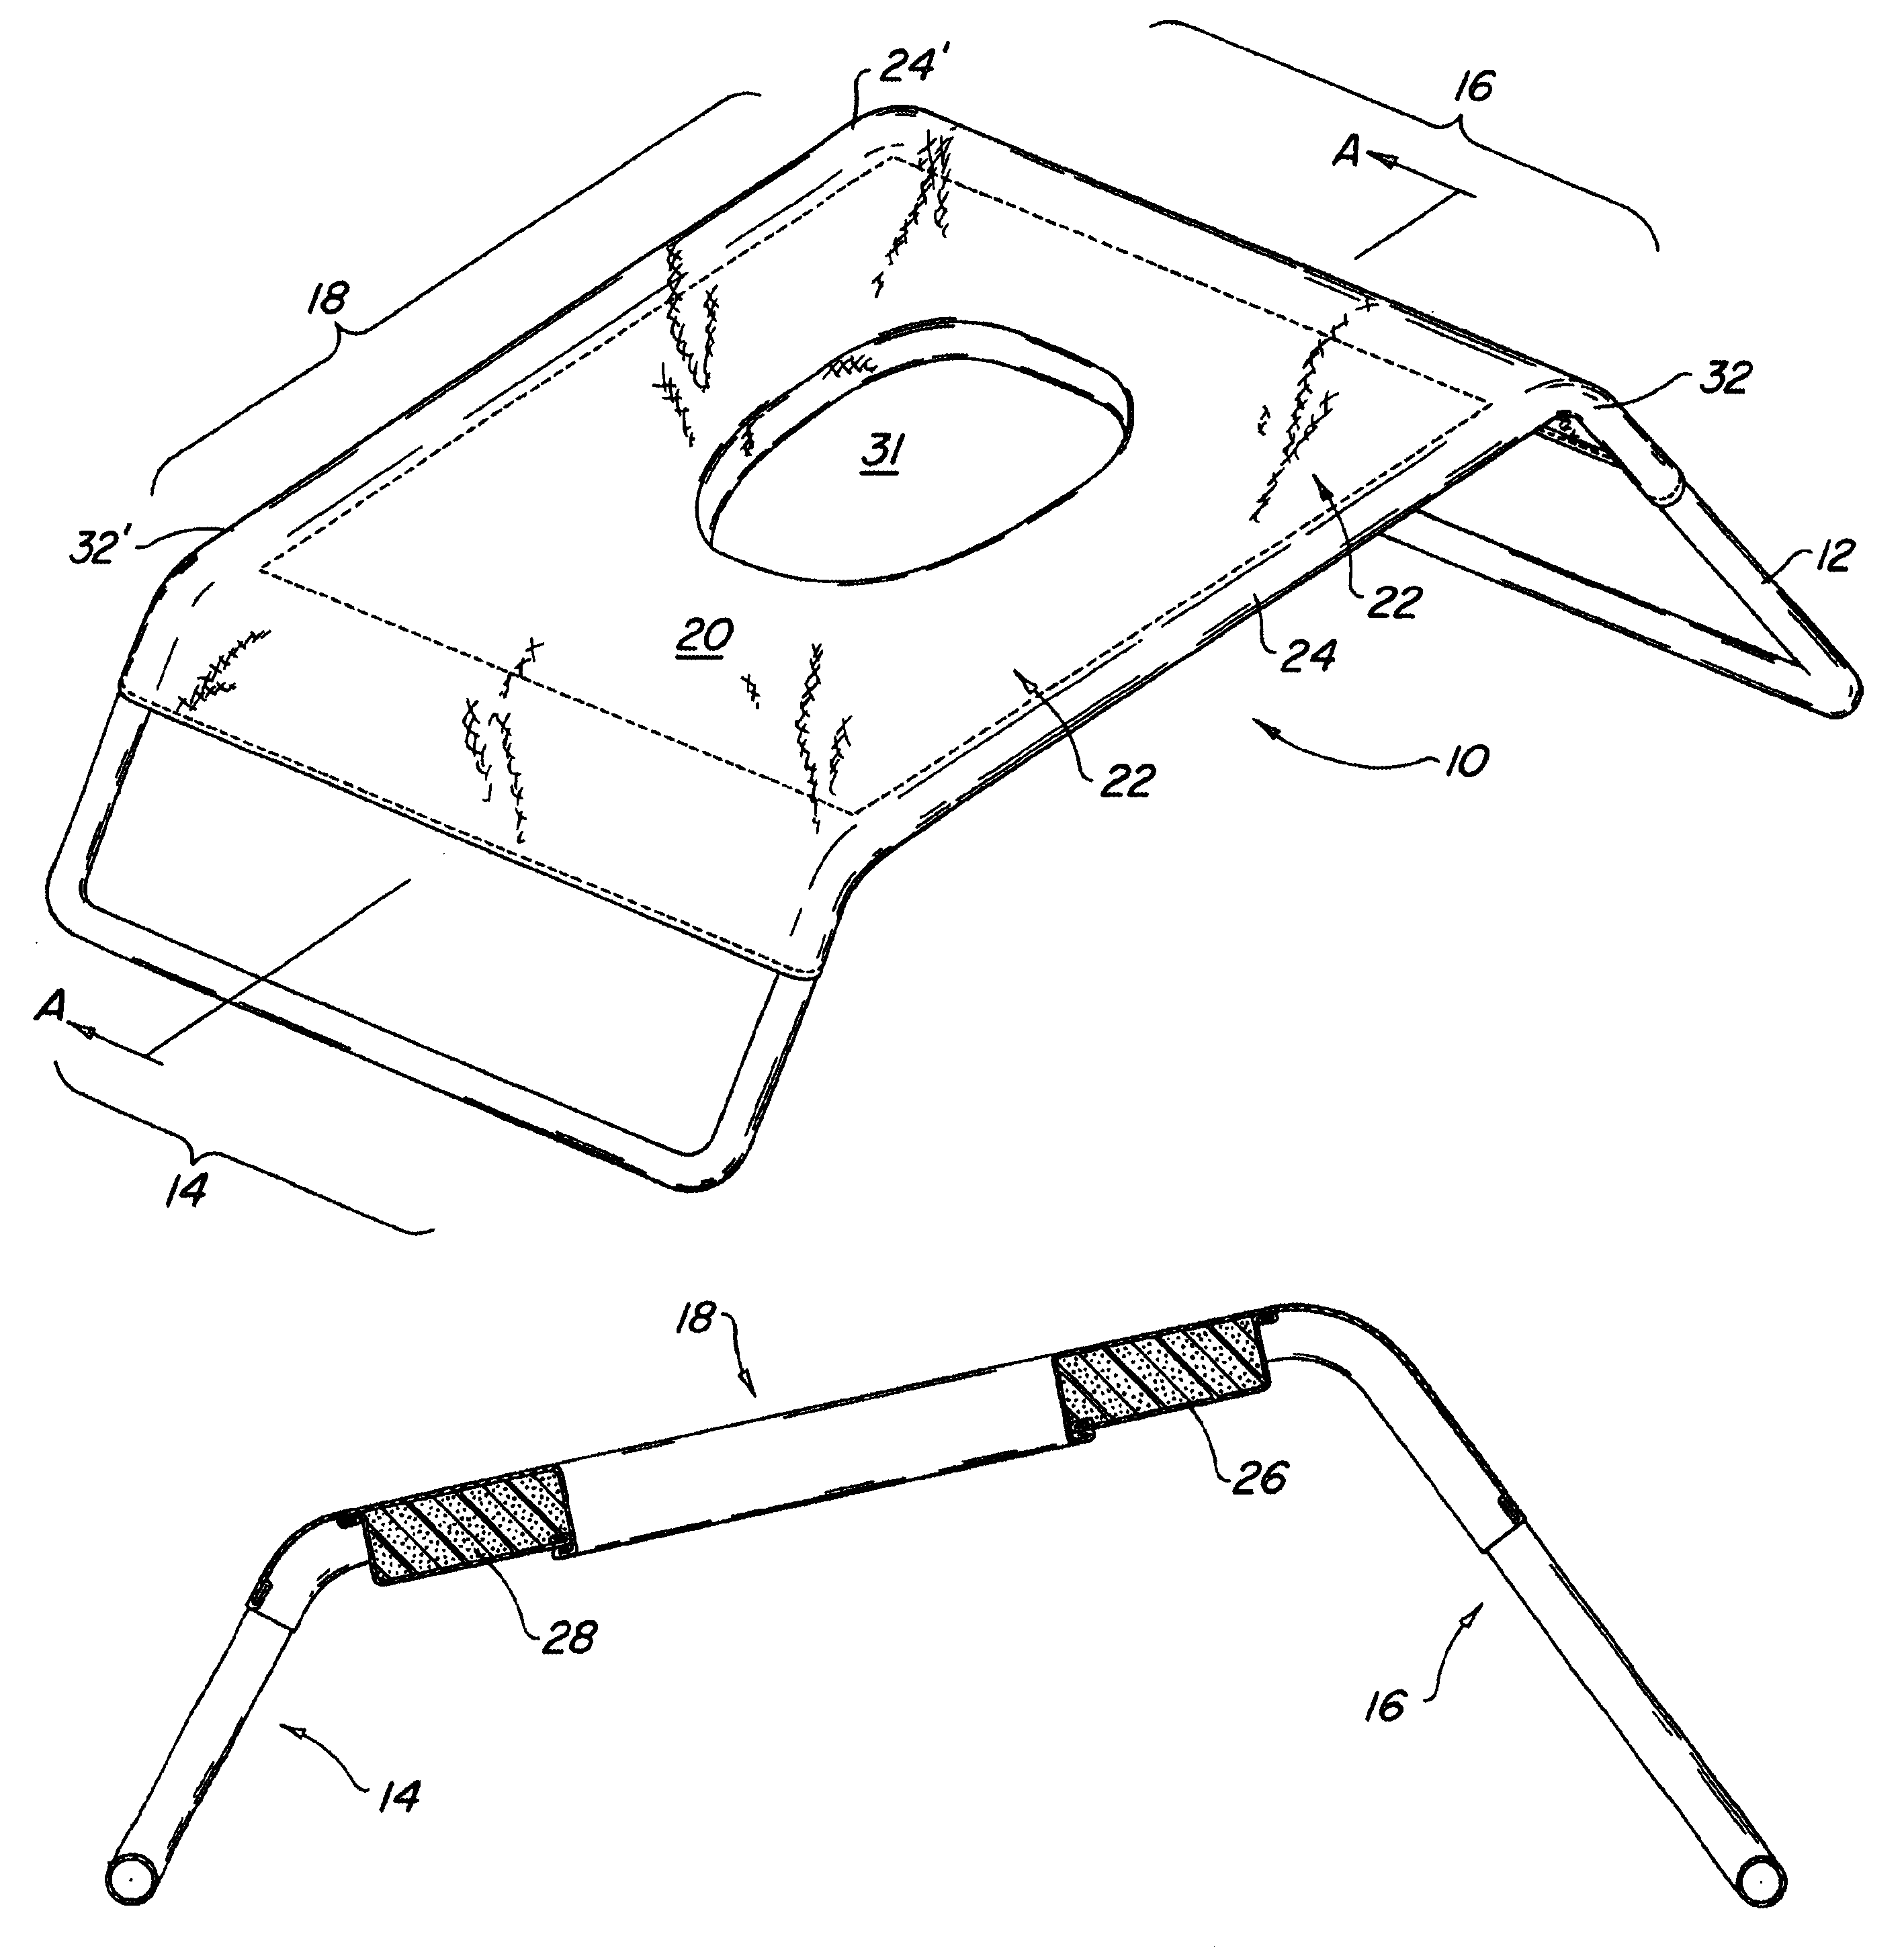 Facial support device